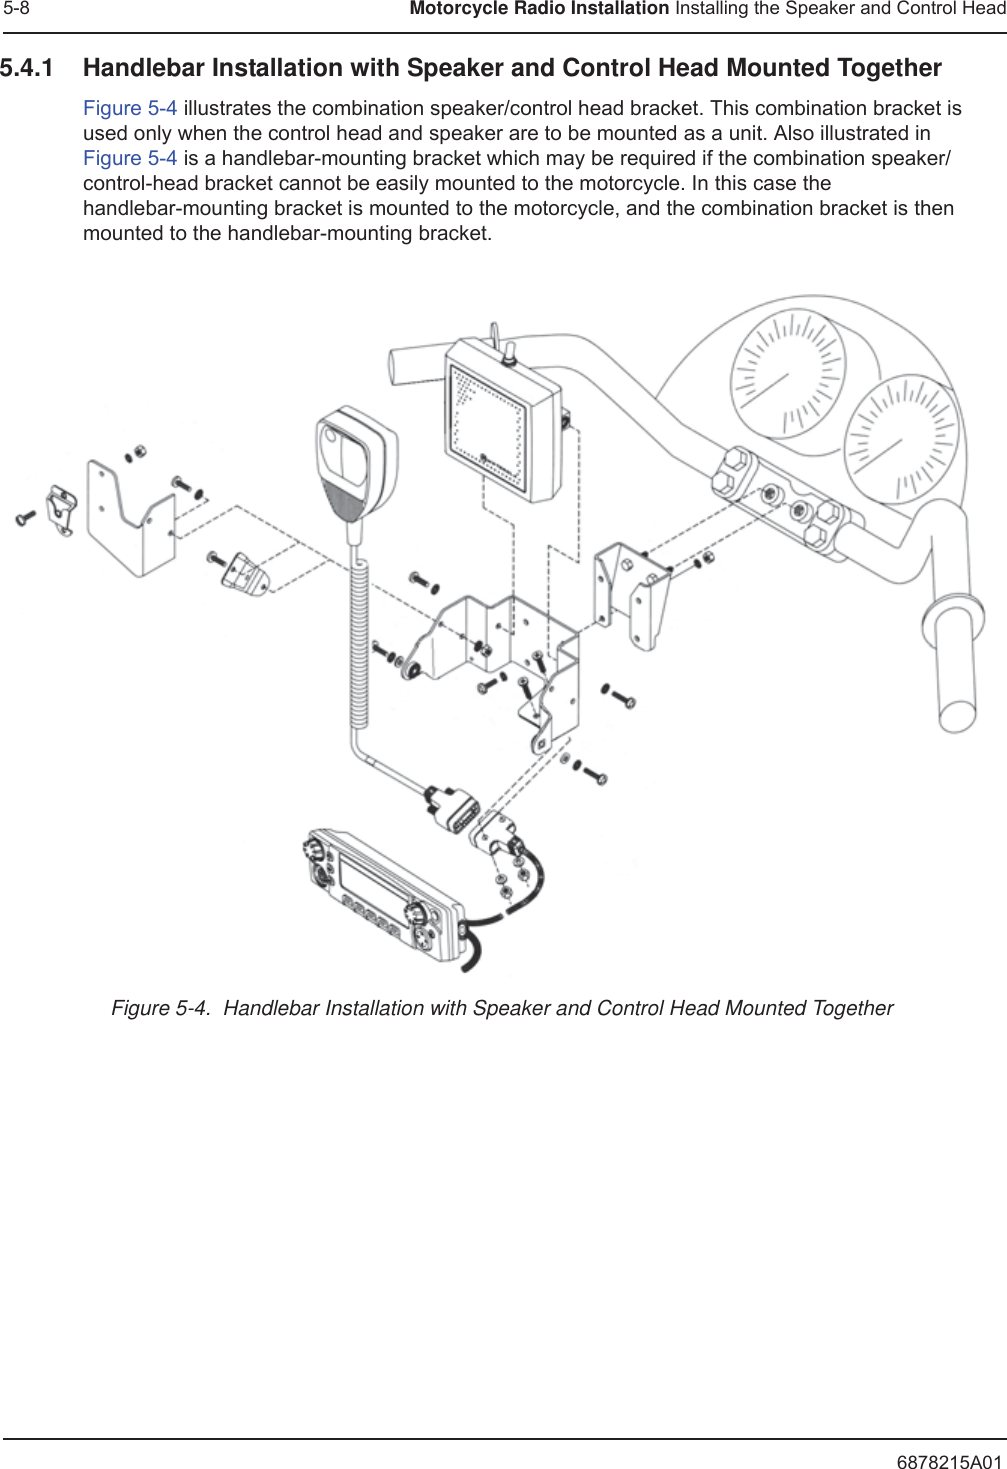 6878215A015-8 Motorcycle Radio Installation Installing the Speaker and Control Head5.4.1 Handlebar Installation with Speaker and Control Head Mounted TogetherFigure 5-4 illustrates the combination speaker/control head bracket. This combination bracket is used only when the control head and speaker are to be mounted as a unit. Also illustrated in Figure 5-4 is a handlebar-mounting bracket which may be required if the combination speaker/control-head bracket cannot be easily mounted to the motorcycle. In this case the handlebar-mounting bracket is mounted to the motorcycle, and the combination bracket is then mounted to the handlebar-mounting bracket.Figure 5-4.  Handlebar Installation with Speaker and Control Head Mounted Together